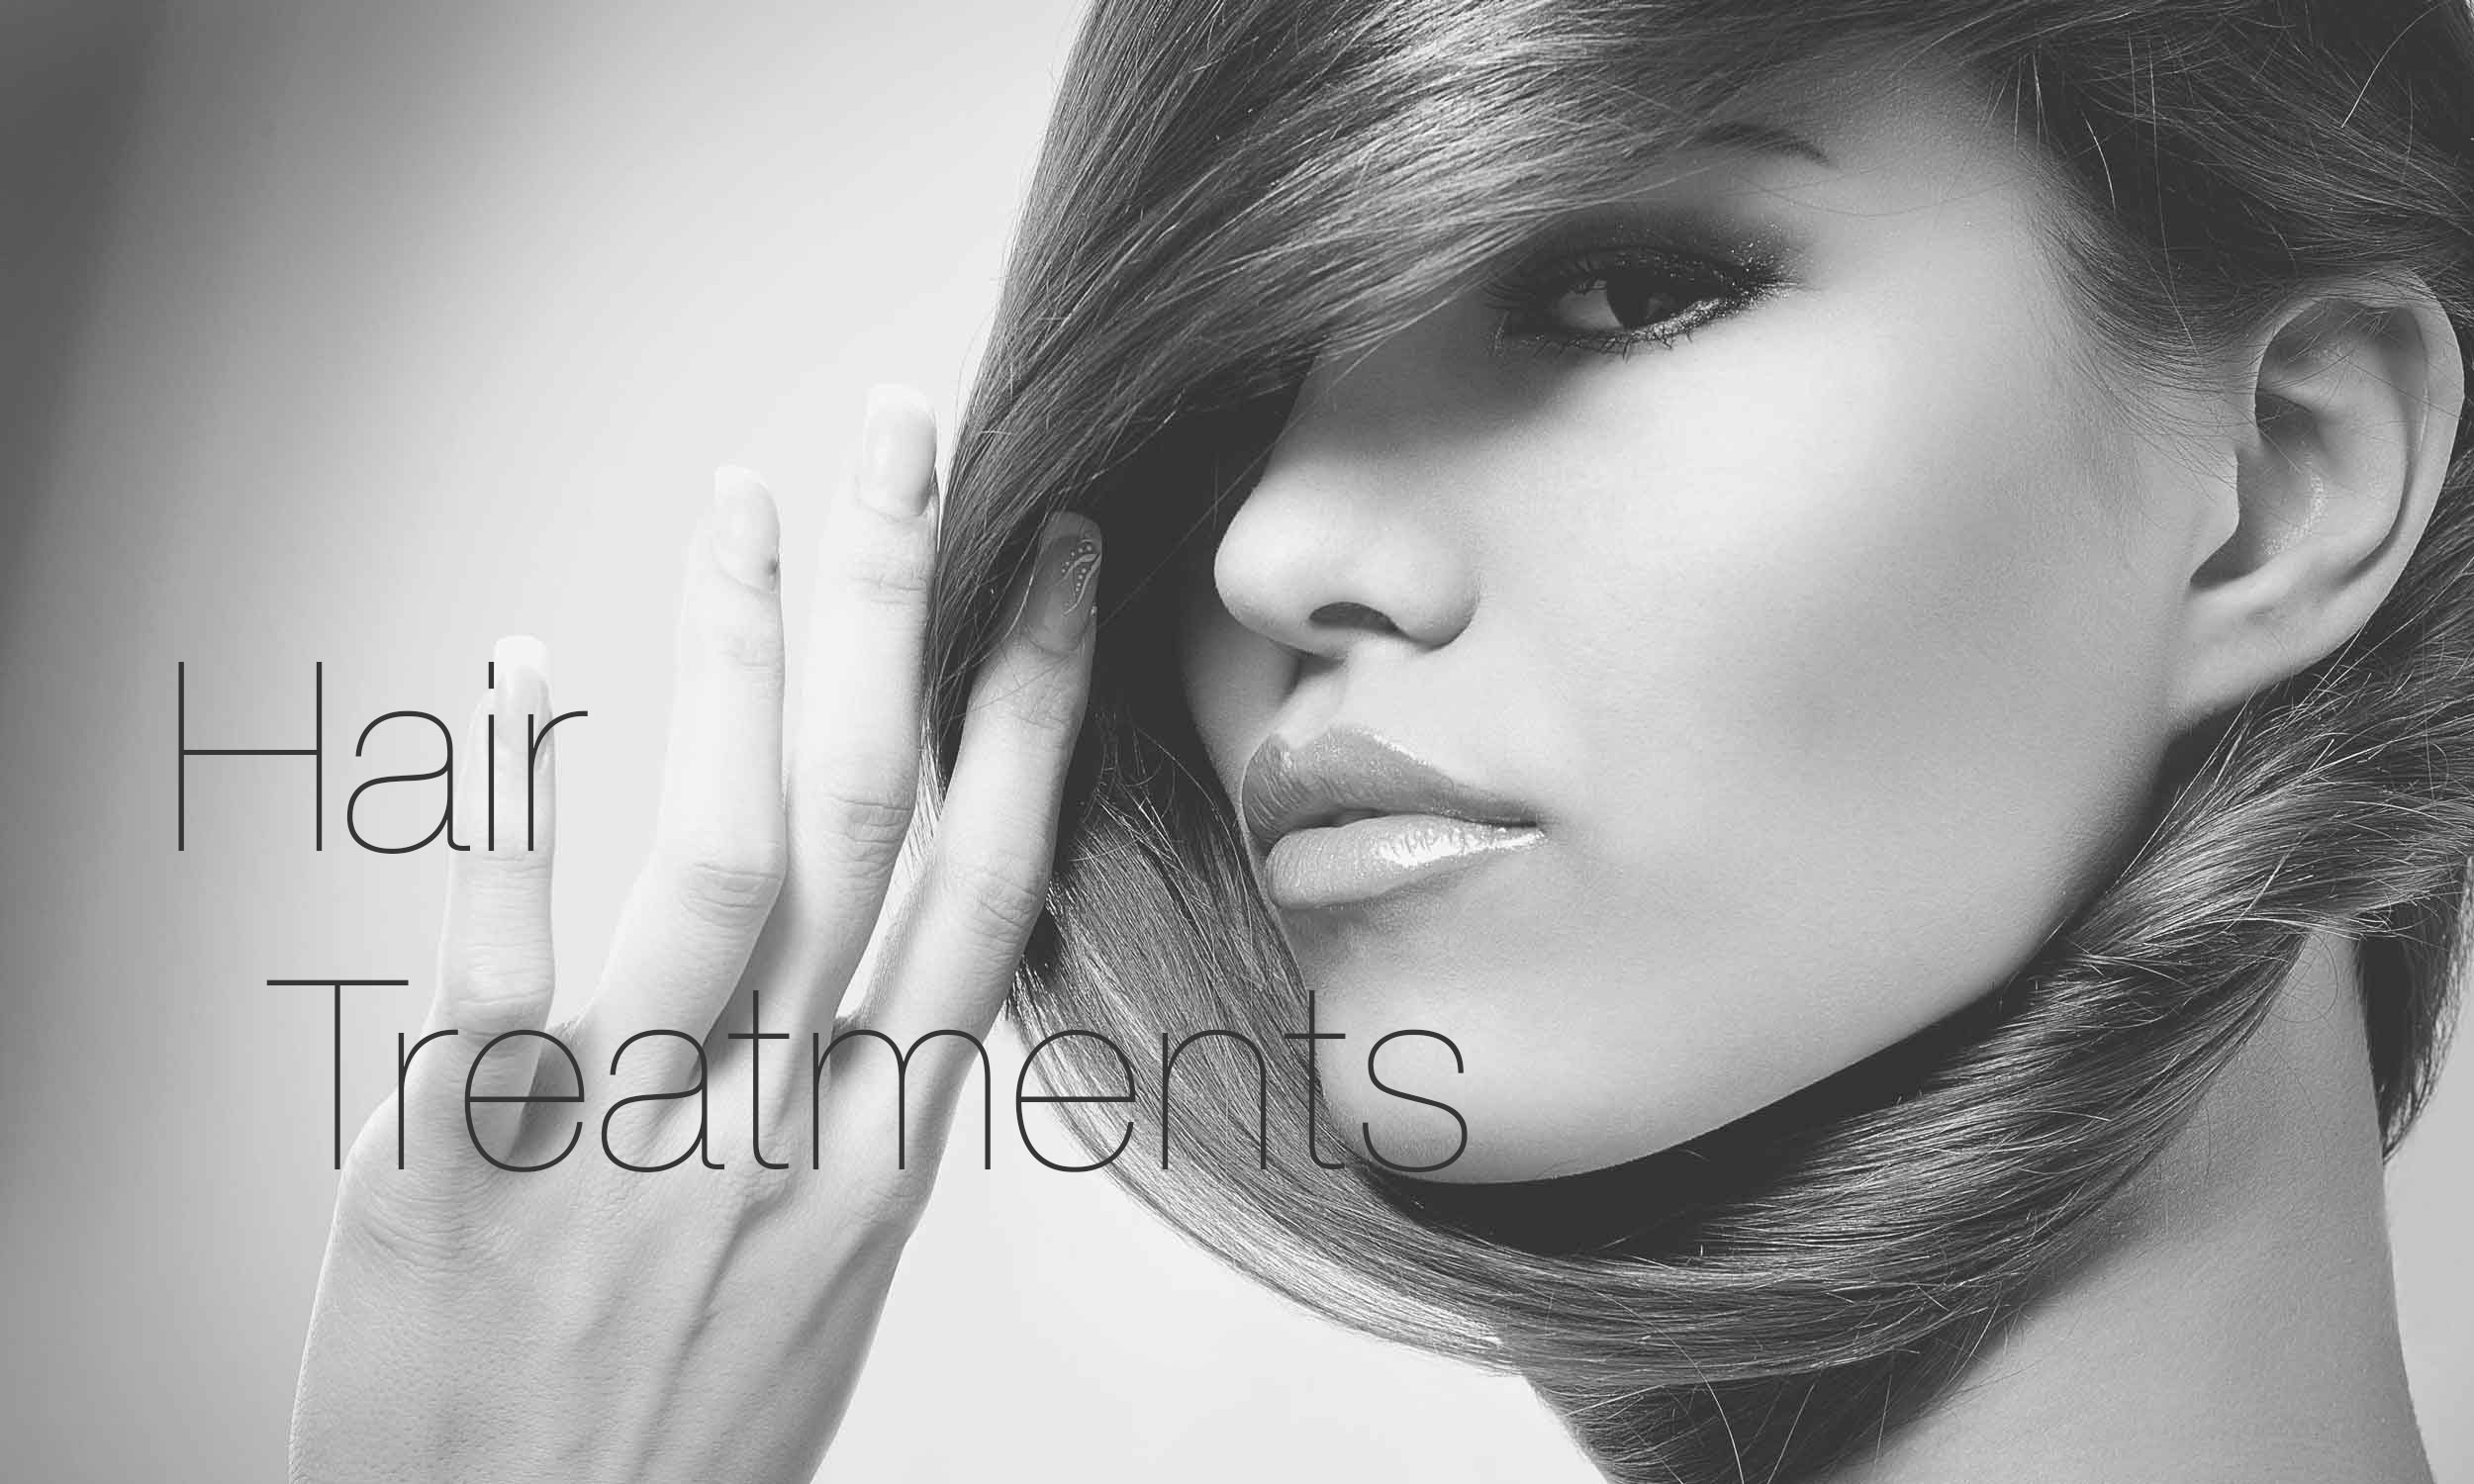 Hair Straightening &amp; Relaxing Treatments